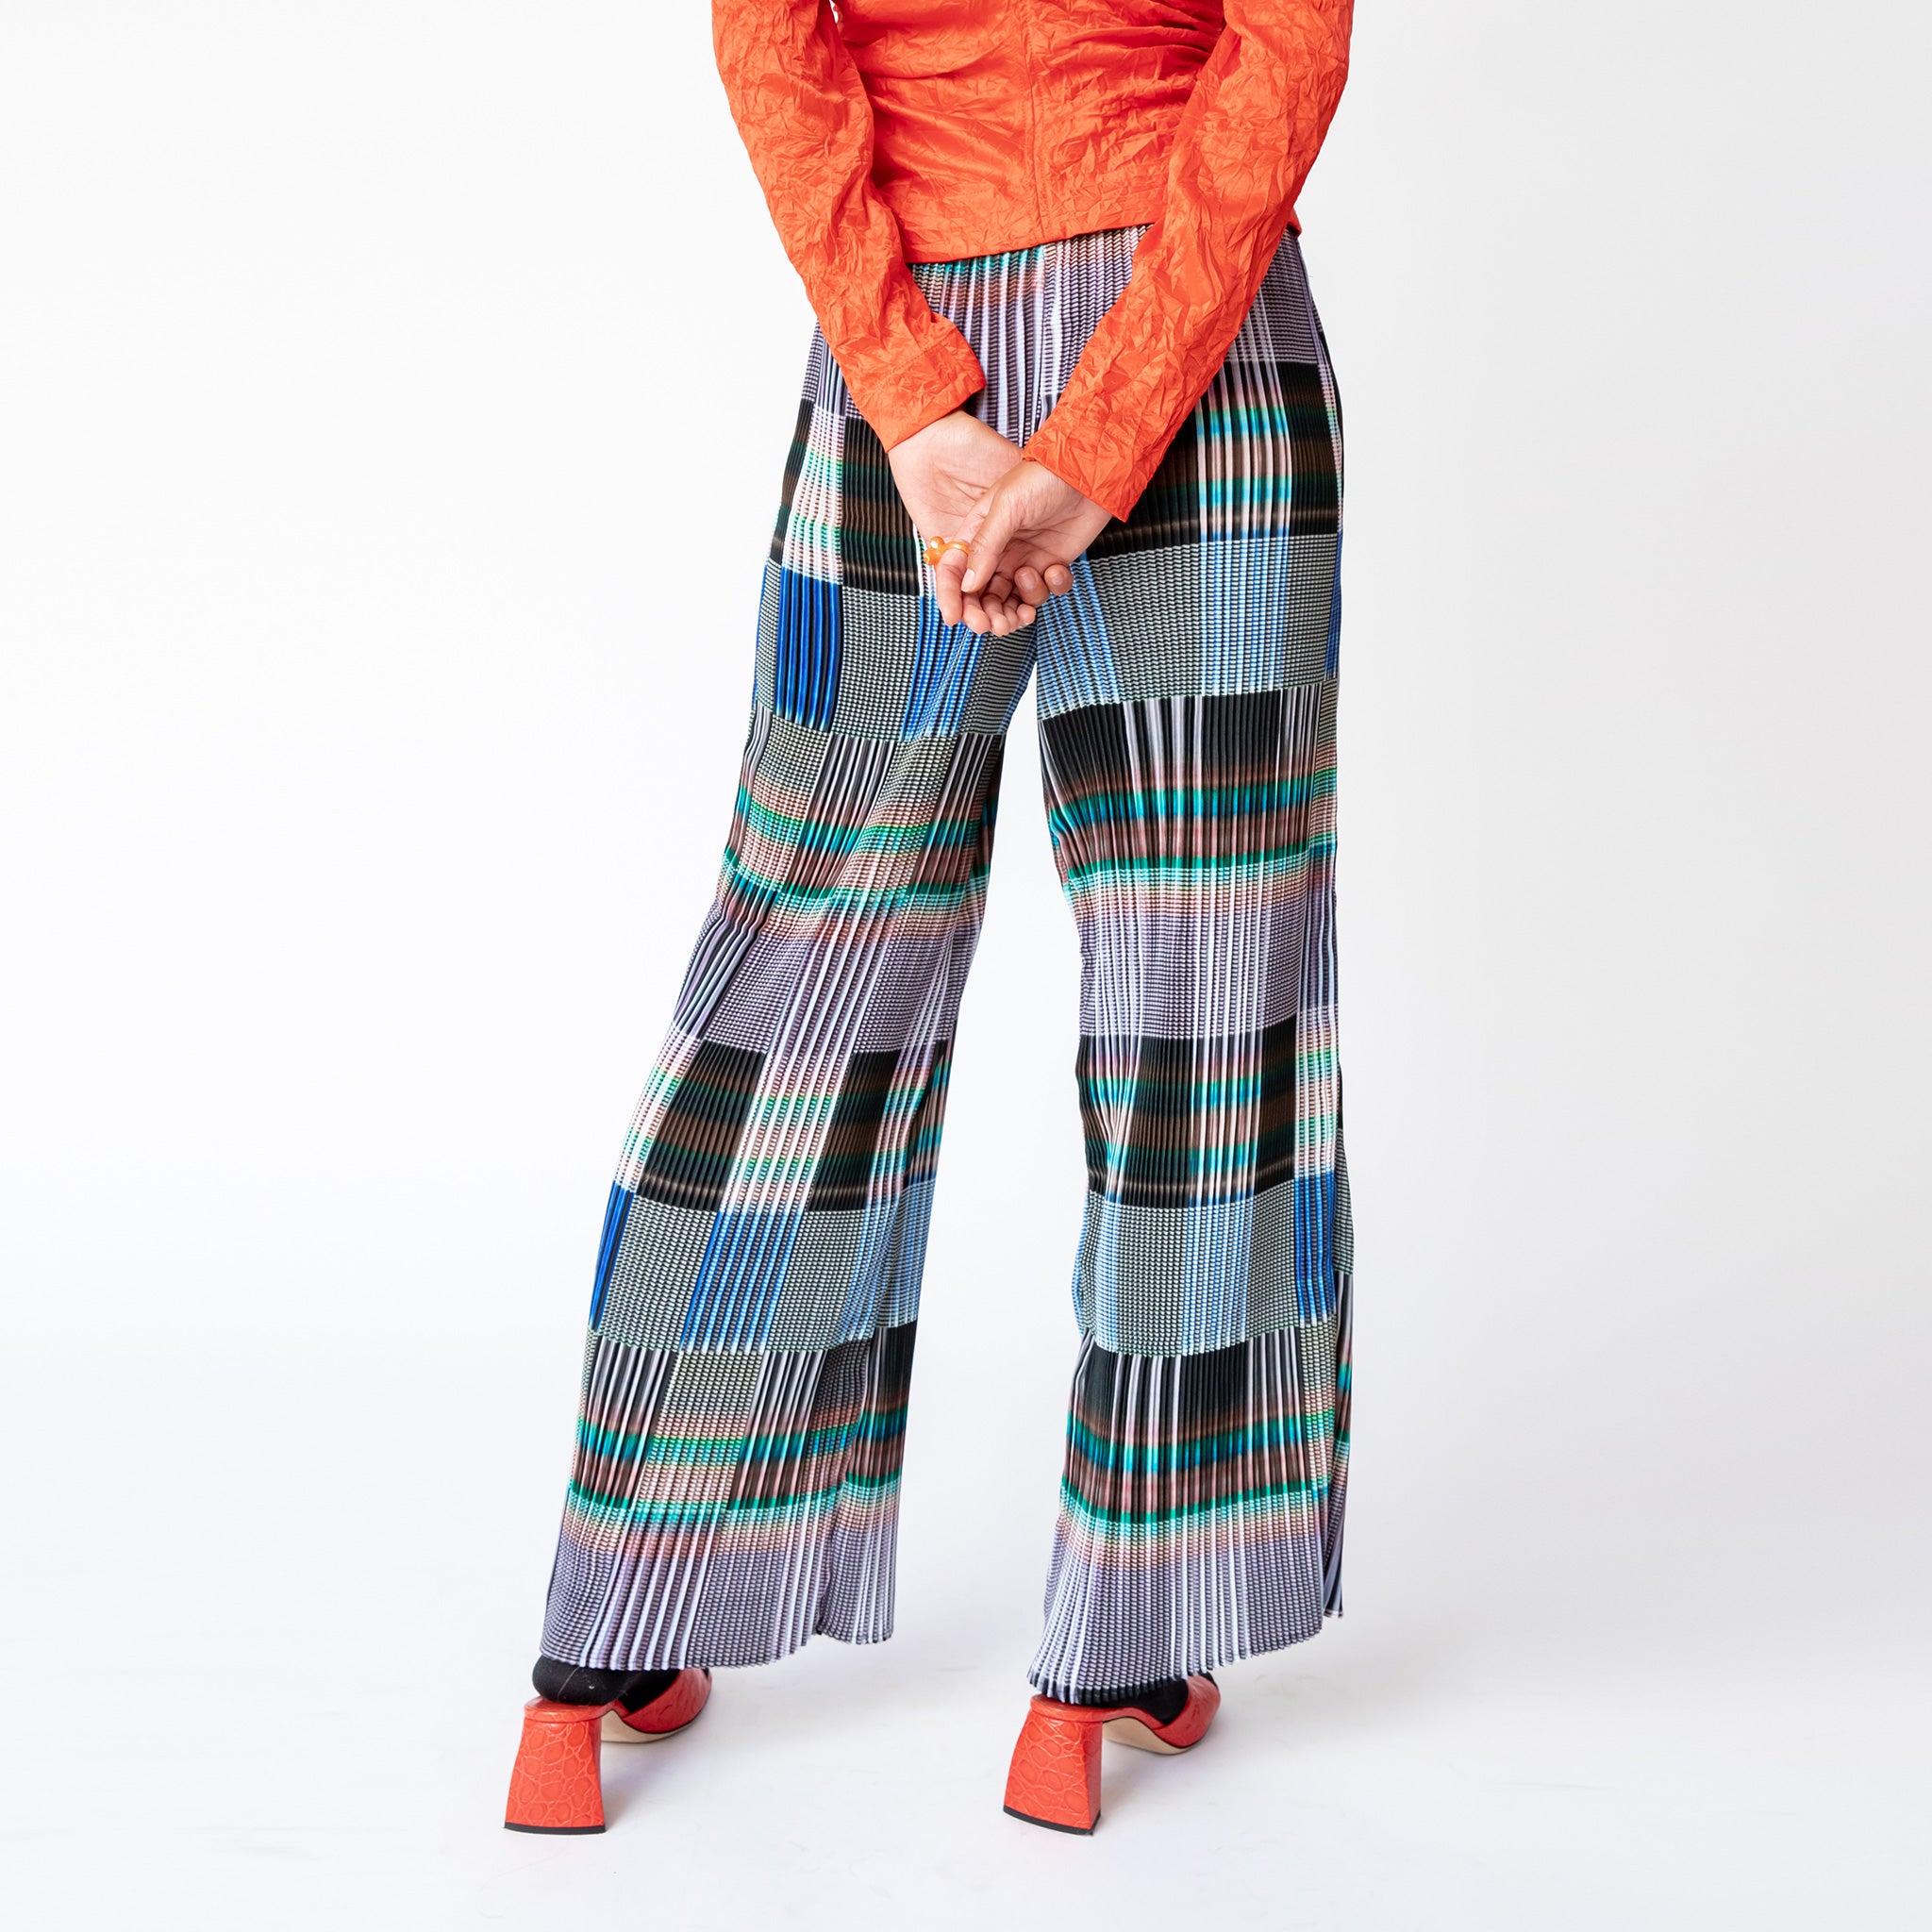 Rear view of the Julie Heuer pleated Jack Trousers in a gridded print pattern as worn with a vibrant red blouse.